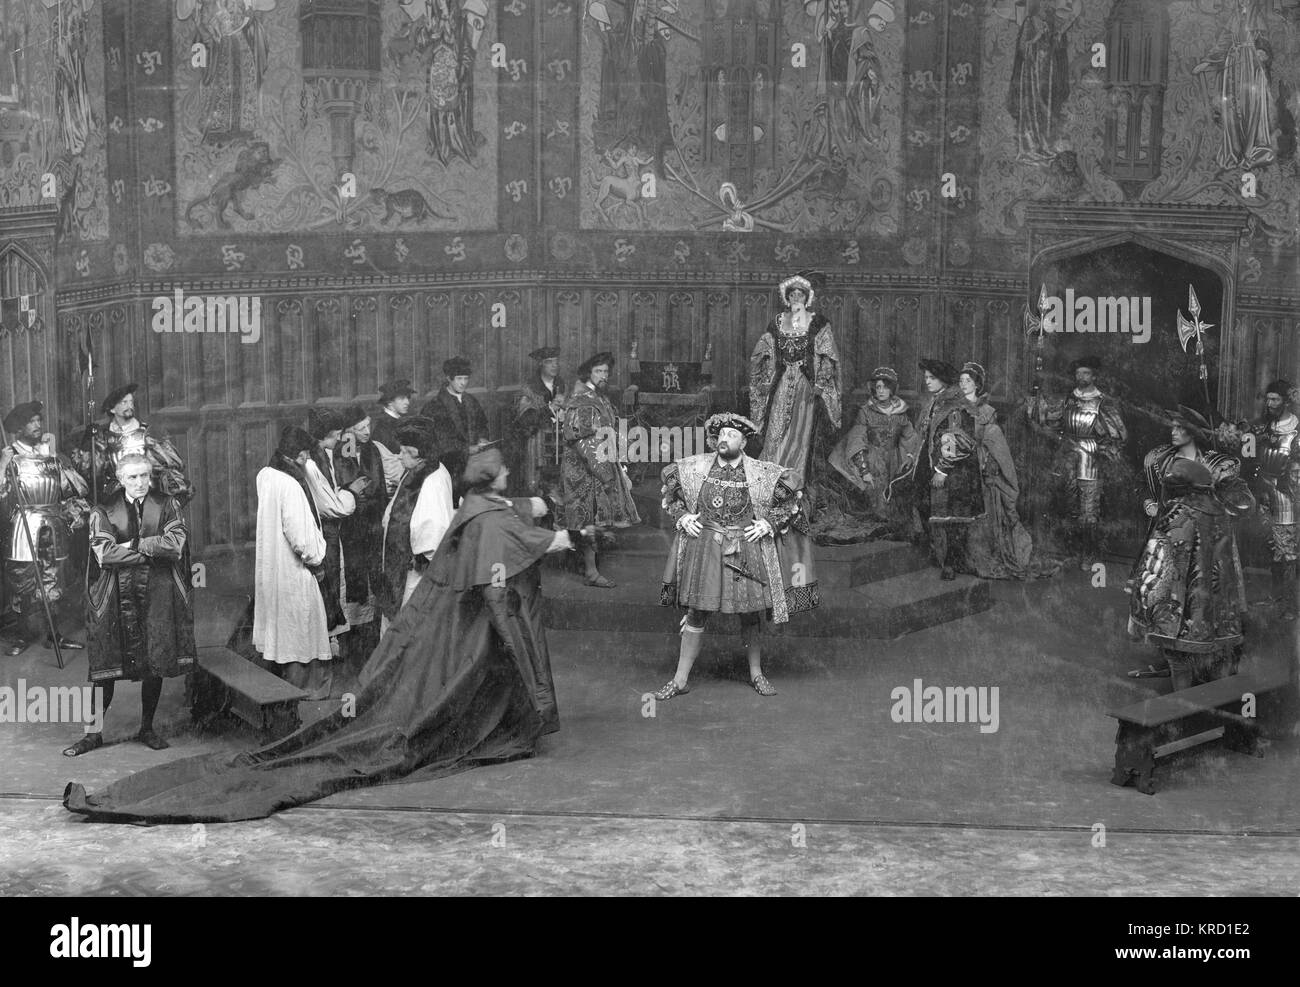 A scene from Shakespeare's play, Henry VIII, in a production by Herbert Beerbohm Tree at His Majesty's Theatre, London.  The production opened in 1910, was revived for the London Shakespeare Festival in 1911, and was repeated again in 1912.  Tree played Cardinal Wolsey.  Other actors were Violet Vanbrugh (Queen Katherine), Arthur Bourchier (King Henry) and Laura Cowie (Anne Bullen).  This scene shows a confrontation between Henry and Wolsey, while members of the court look on, concerned.   (3 of 6)     Date: circa 1910-1912 Stock Photo